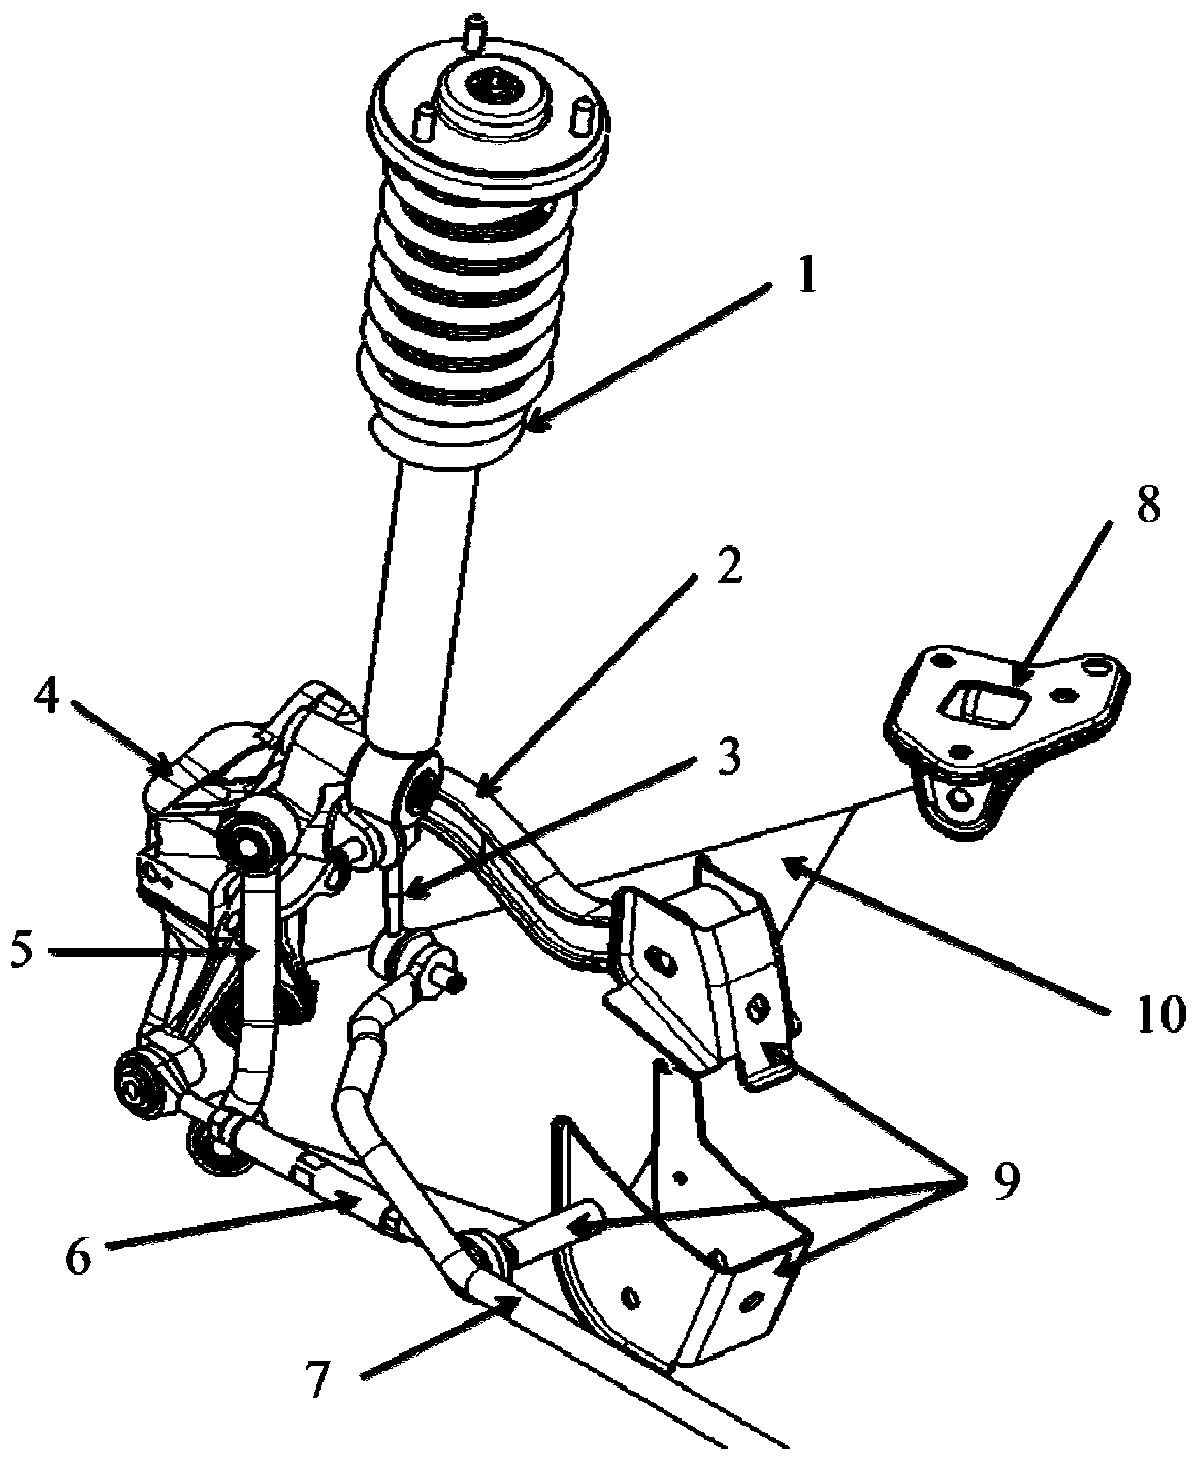 An Optimal Design Method for Key Structural Parts of Automobile Suspension